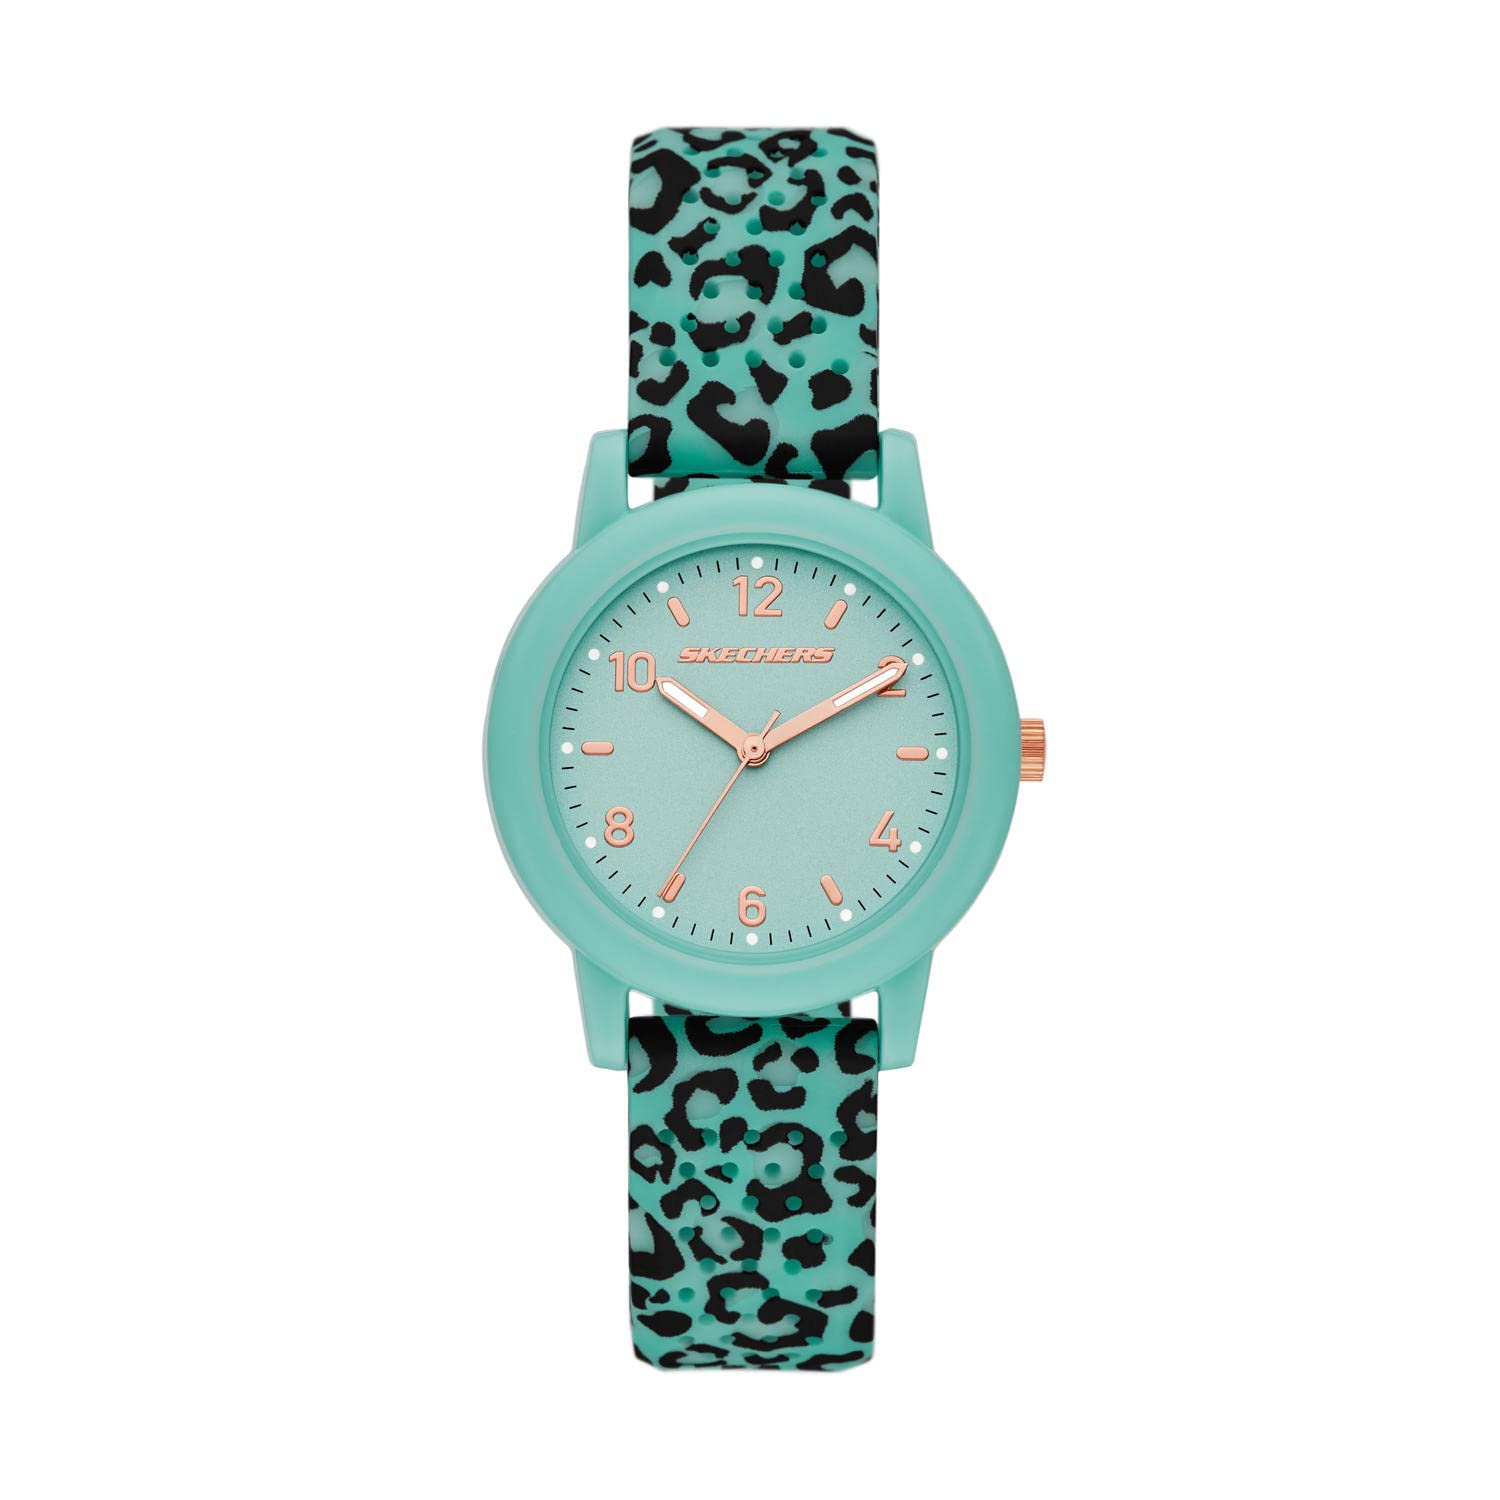 Skechers Women's Quartz Analog Silicone or Leather Casual Sports Watch